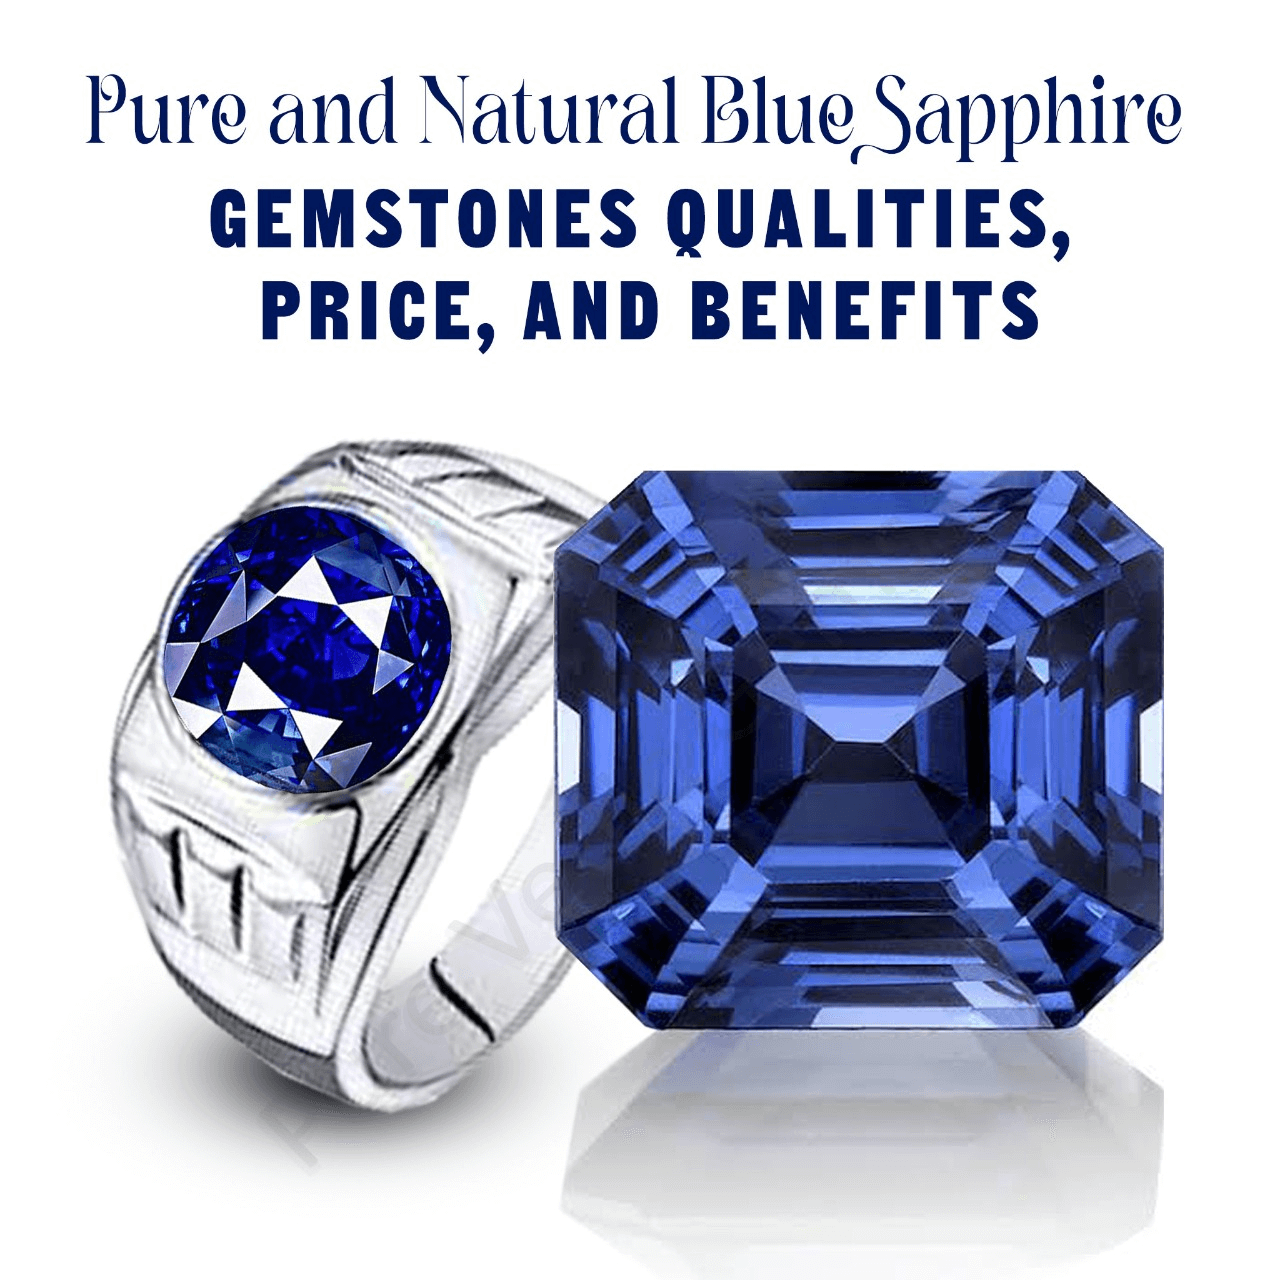 Pure and Natural Blue Sapphire gemstone Qualities, Price, and Benefits.